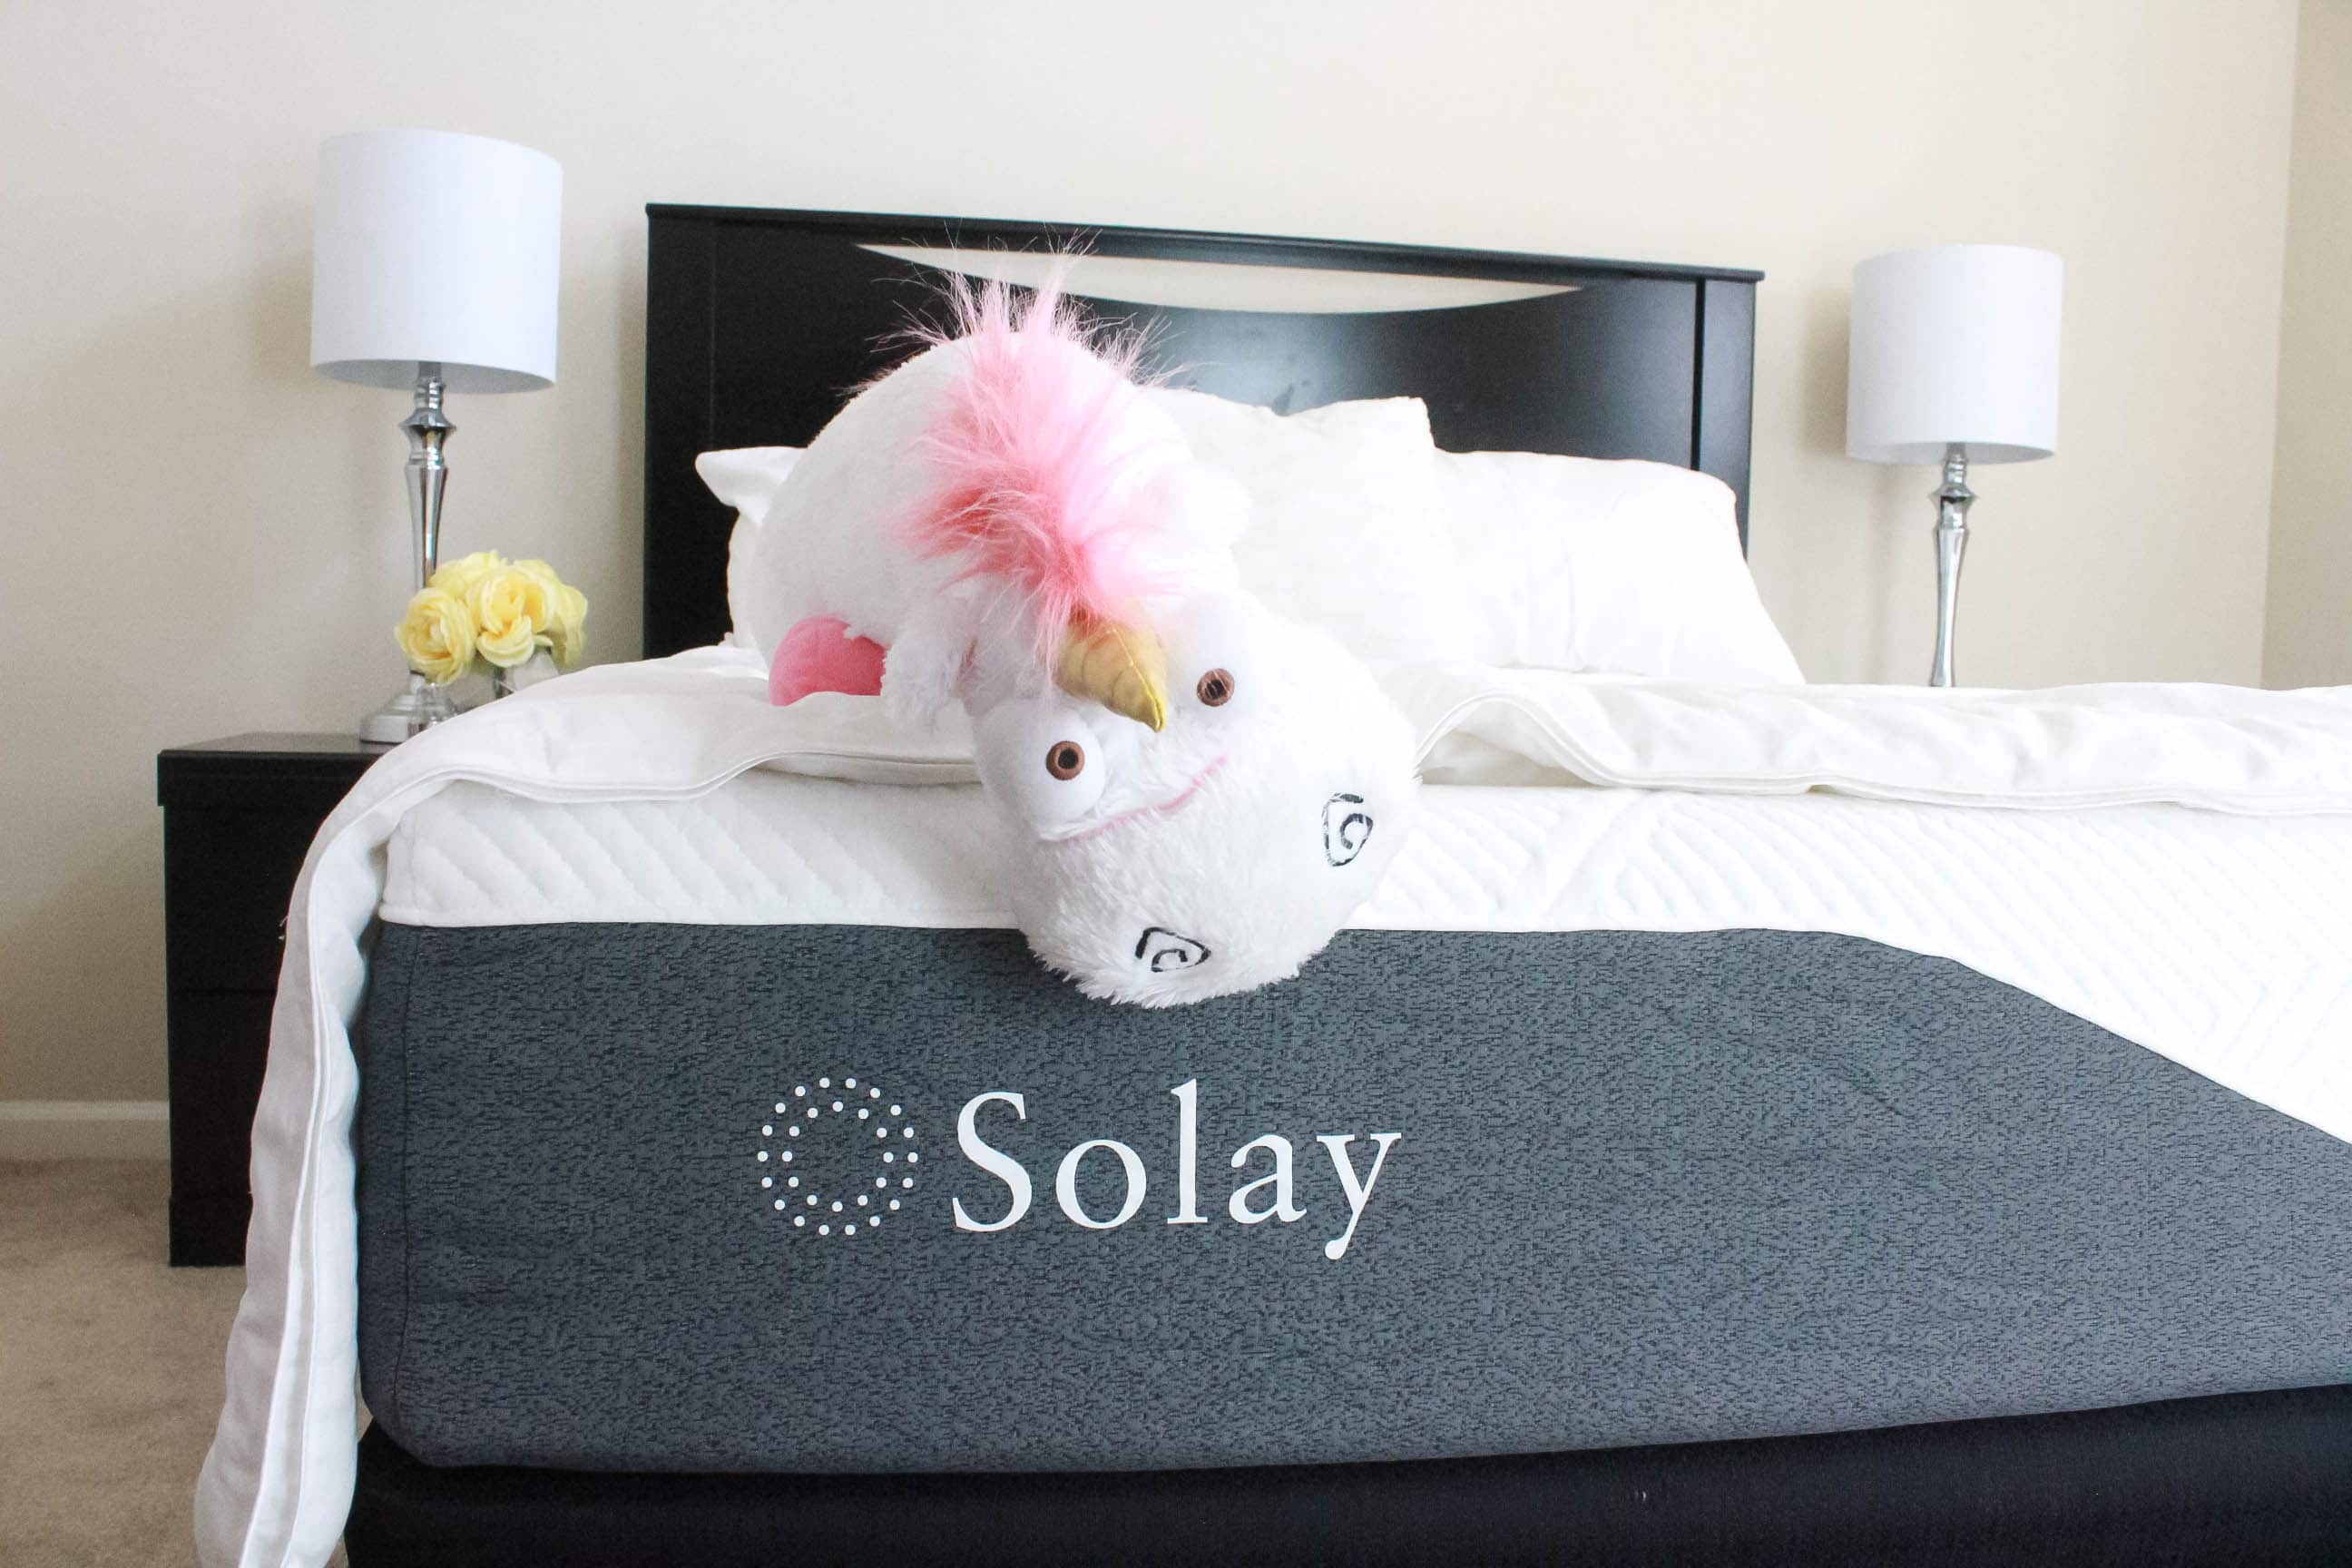 missyonmadison, missyonmadion blog, missyonmadison instagram, solay sleep, solay sleep review, solay sleep mattress, mattress review, casper mattress, memory foam mattress, mattress reviews, la blogger, lifestyle blogger, home decor goals, bedroom decor, home decor, bedding review,